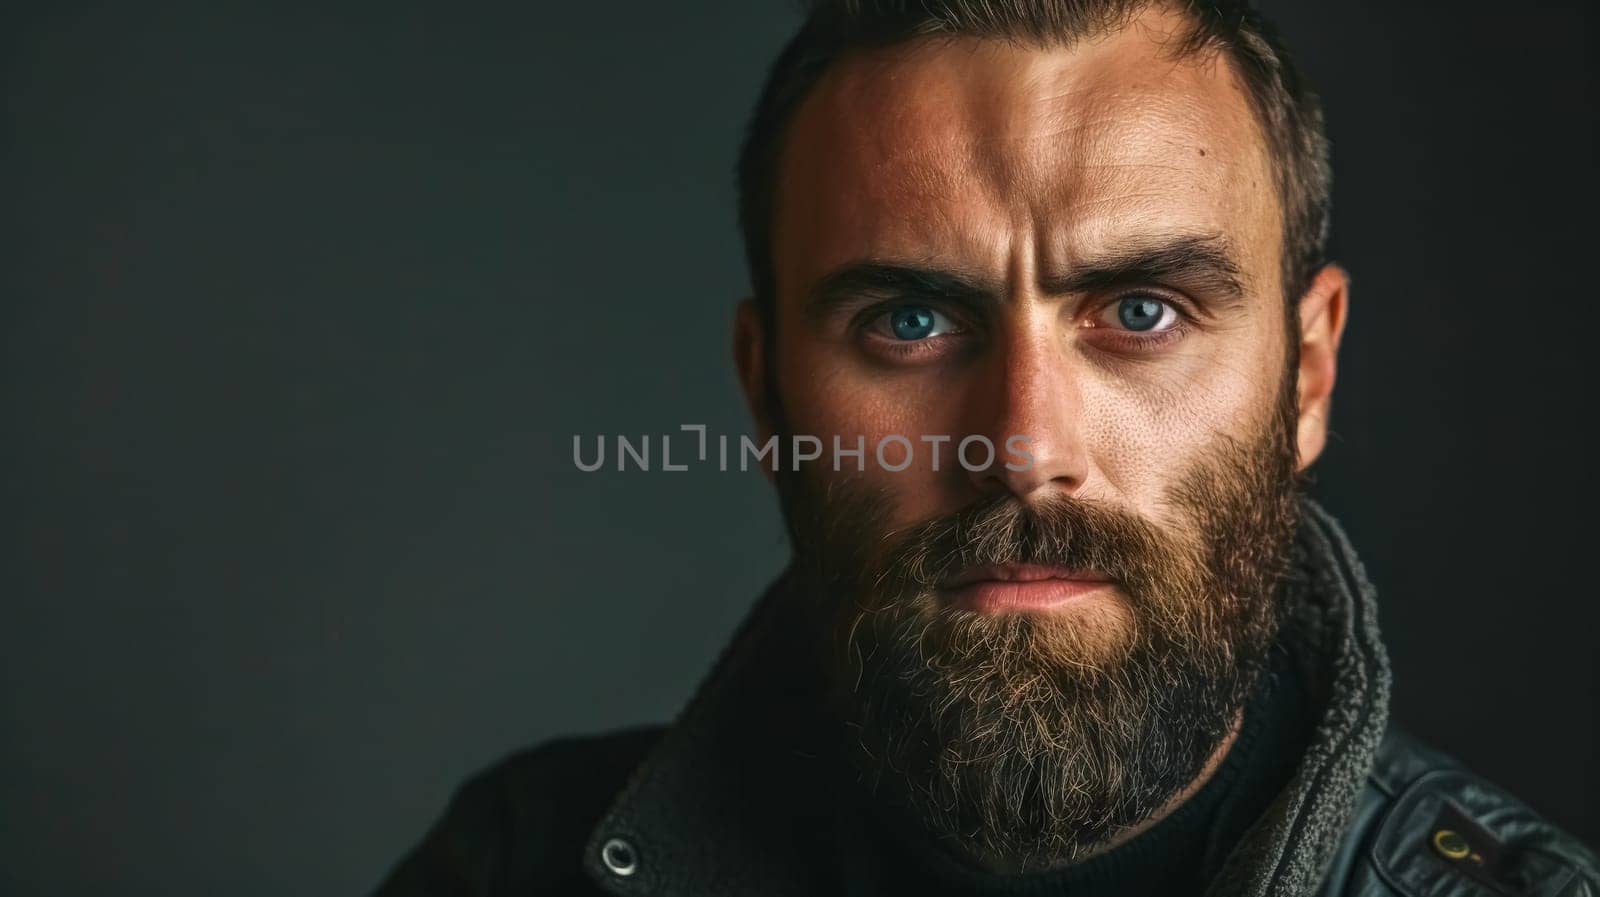 Detailed close-up portrait of an intense, bearded, and contemplative caucasian man with a serious and powerful gaze, displaying a masculine and rugged expression, set against a dark background